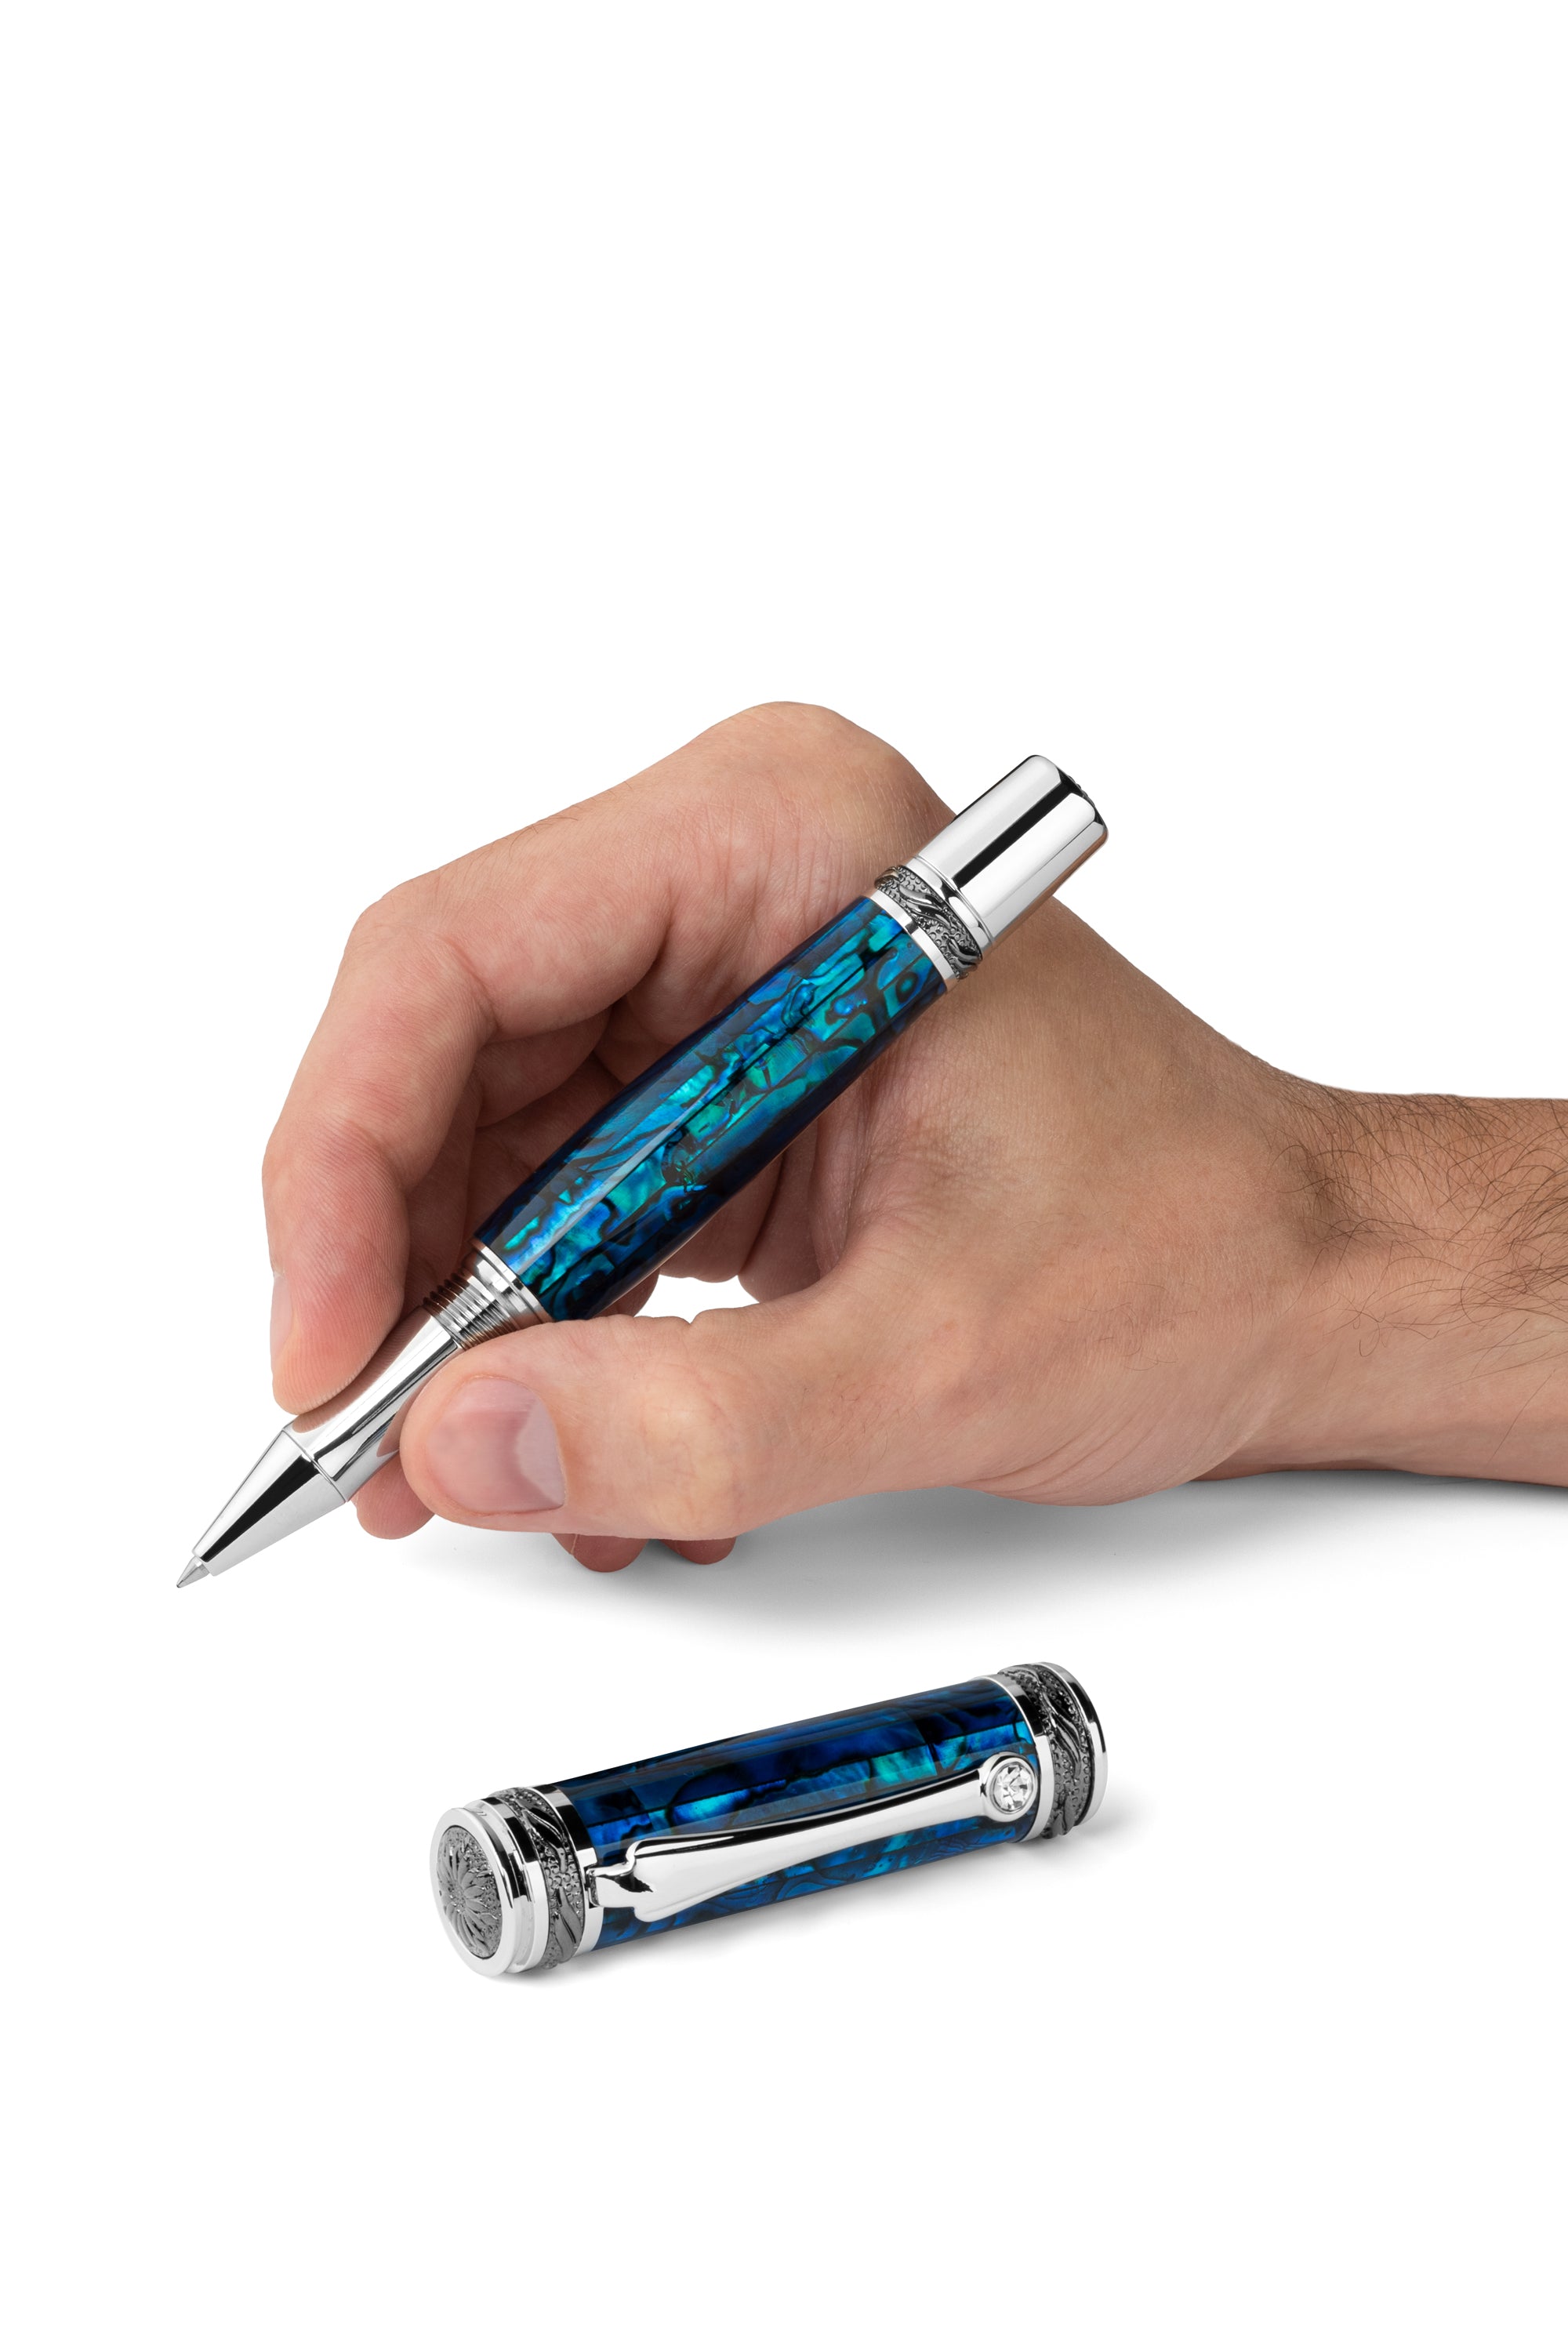 Pitchman - Closer Sapphire Fountain Pen - Luxury Gifts For Men - Fountain  Pens – Pitchman®